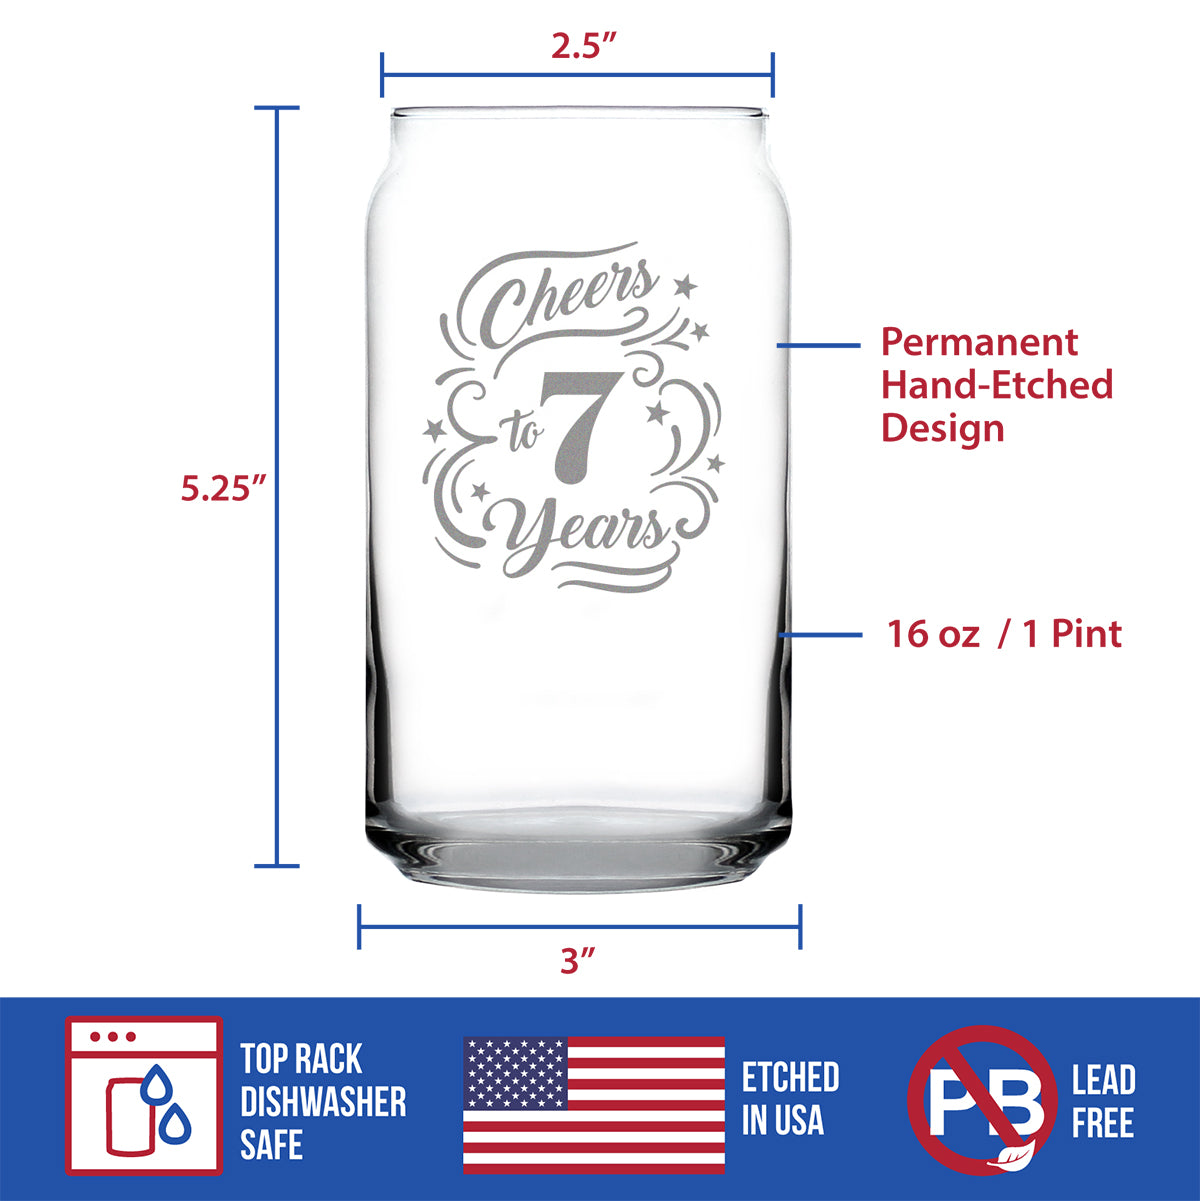 Cheers to 7 Years - Beer Can Pint Glass Gifts for Women &amp; Men - 7th Anniversary Party Decor - 16 Oz Glasses